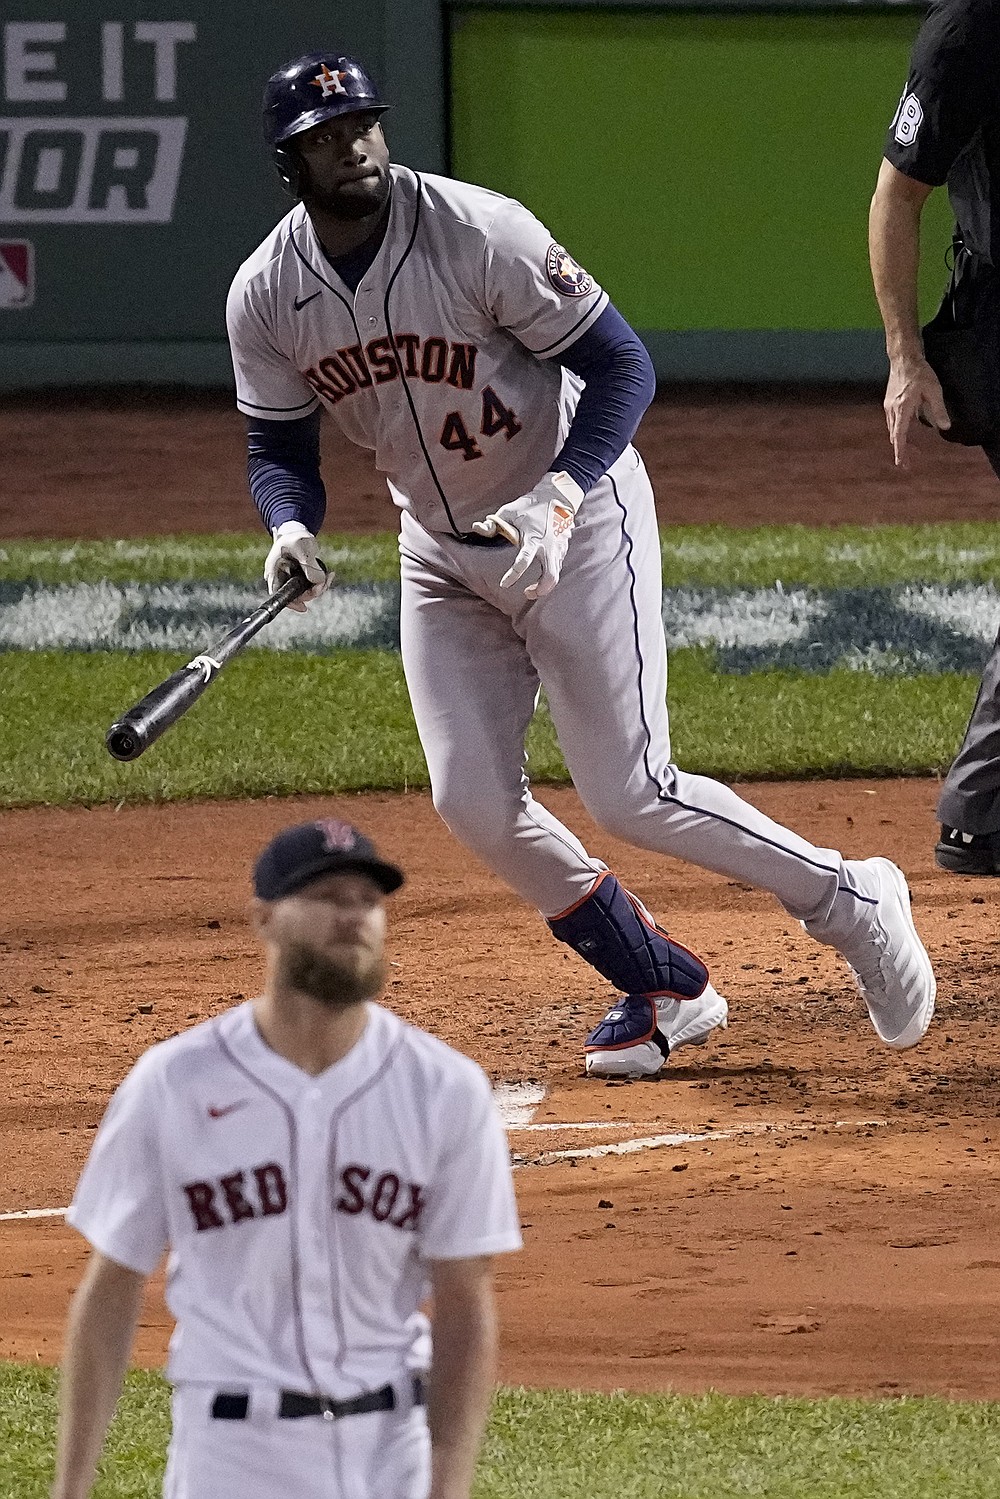 Houston Astros' Yordan Alvarez watches his single off Boston Red Sox starting pitcher Chris Sale during the fourth inning in Game 5 of baseball's American League Championship Series Wednesday, Oct. 20, 2021, in Boston. (AP Photo/Robert F. Bukaty)